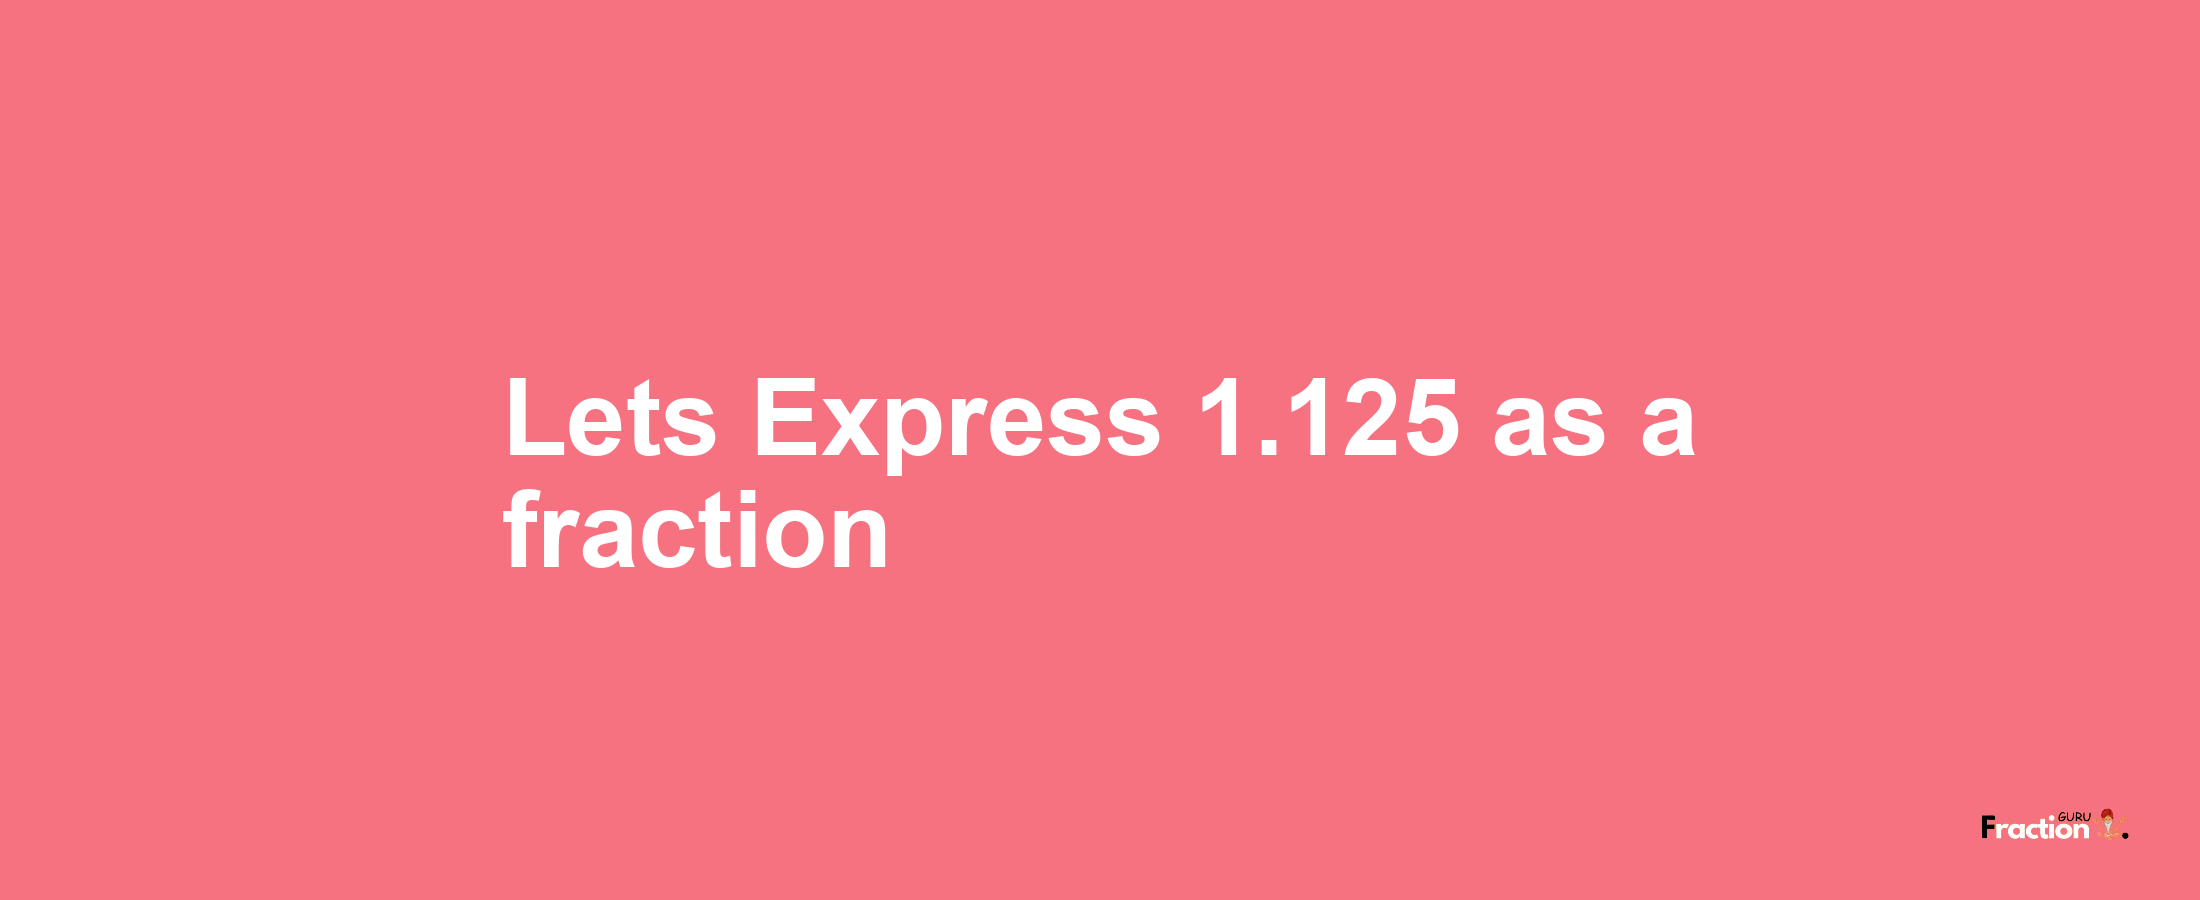 Lets Express 1.125 as afraction